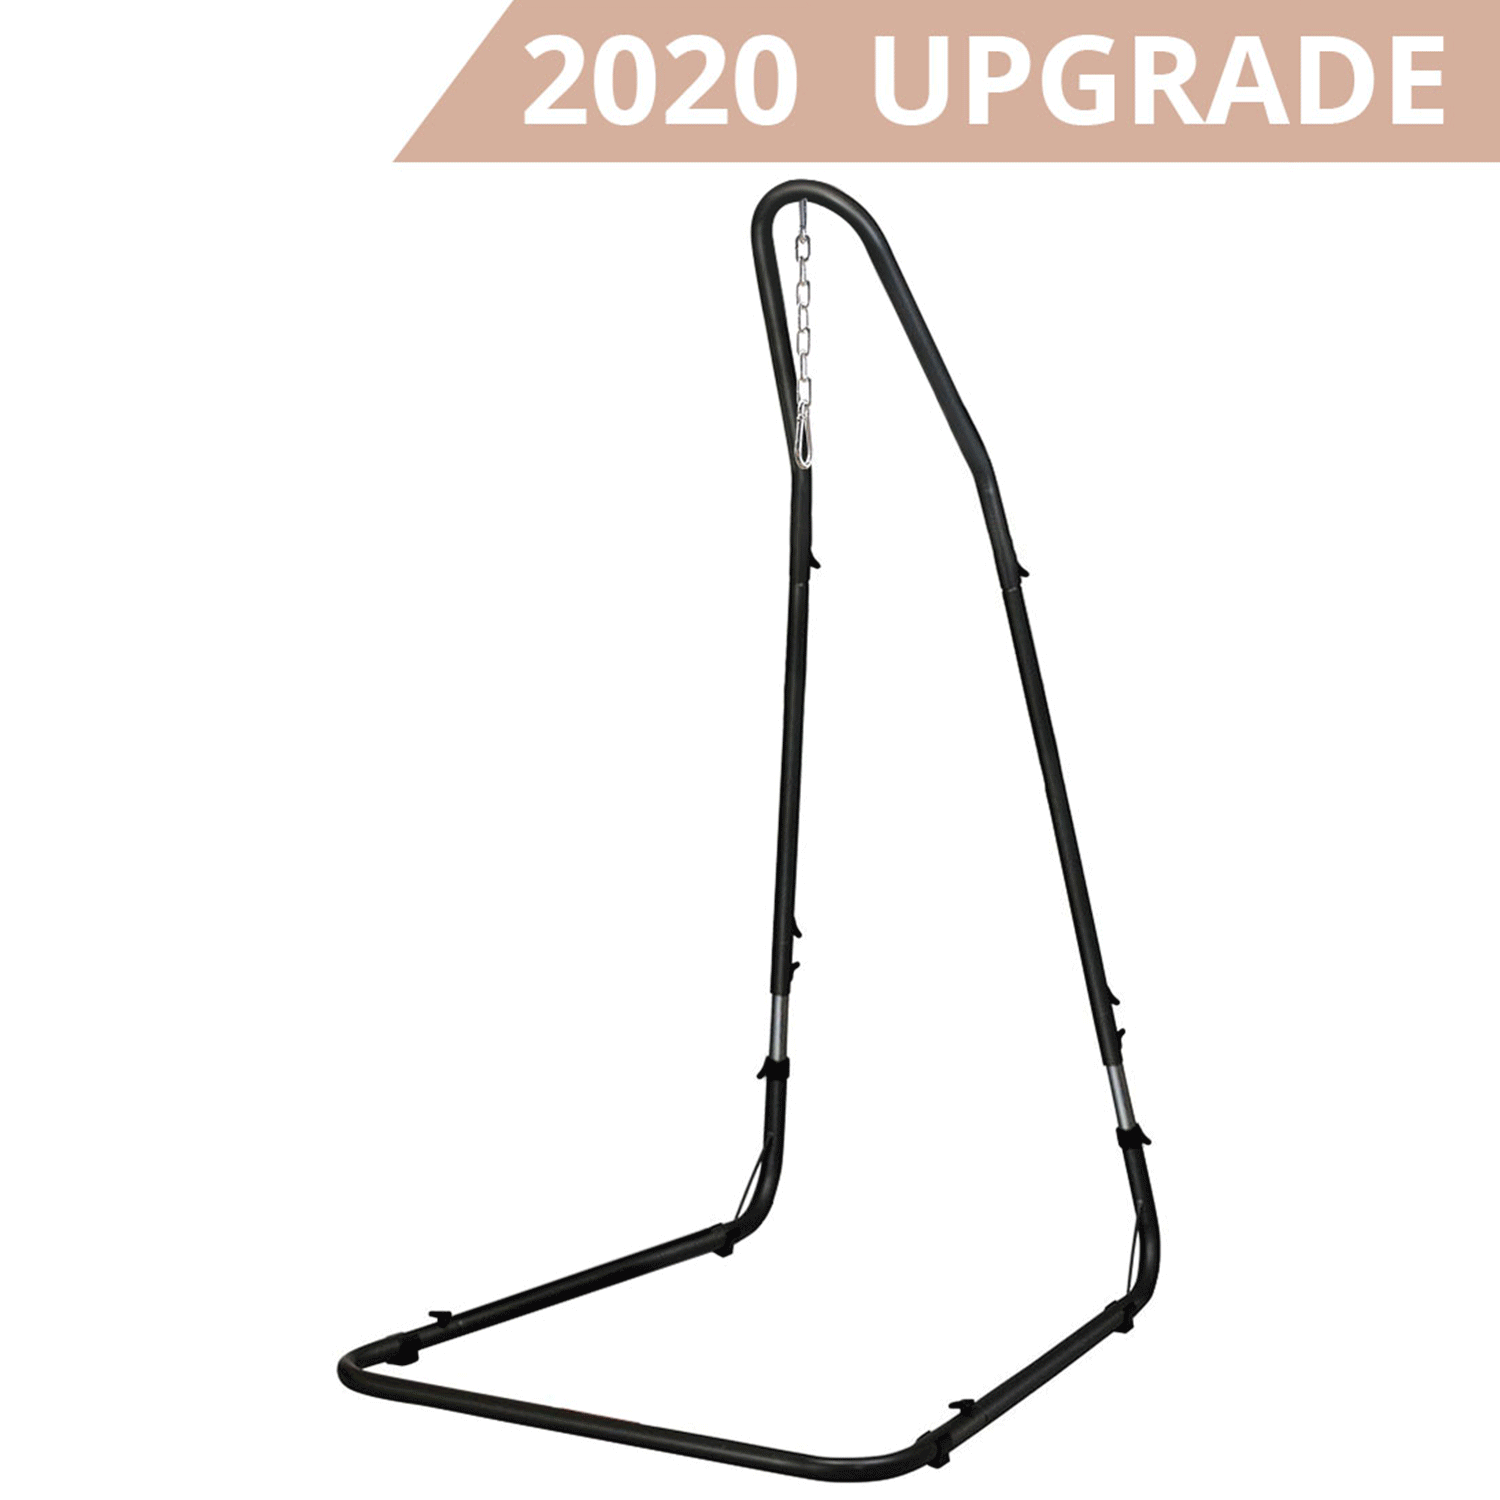 Deck 330 Pound Capacity Zupapa Adjustable Hammock Chair Stand 2020 Upgrade Solid Steel Construction for Hammock Chairs and Swings Perfect for Indoor/Outdoor Patio Yard 